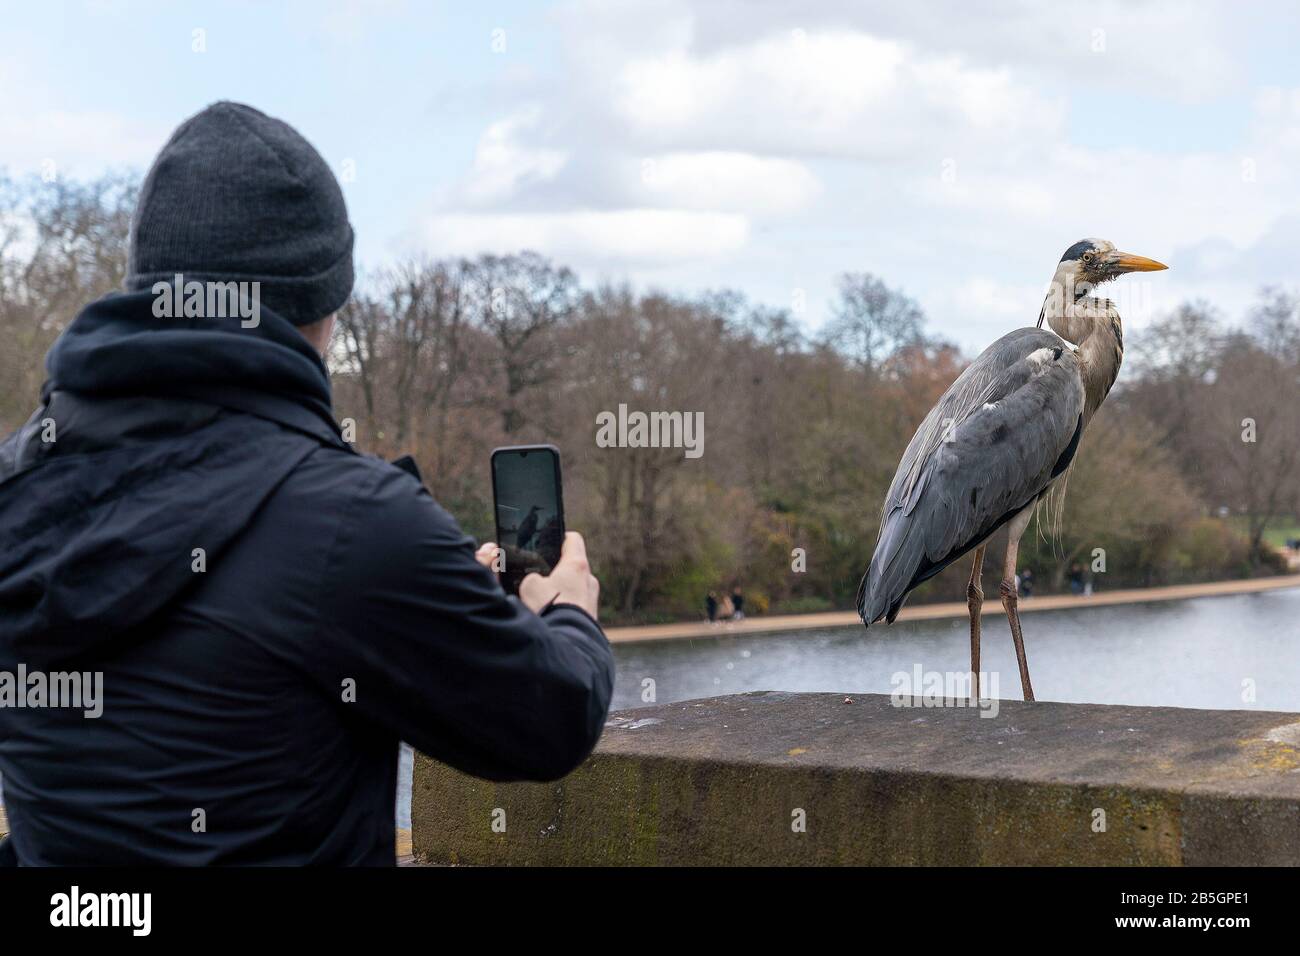 A heron standing on Serpentine bridge ledge is being photographed by passers by Stock Photo